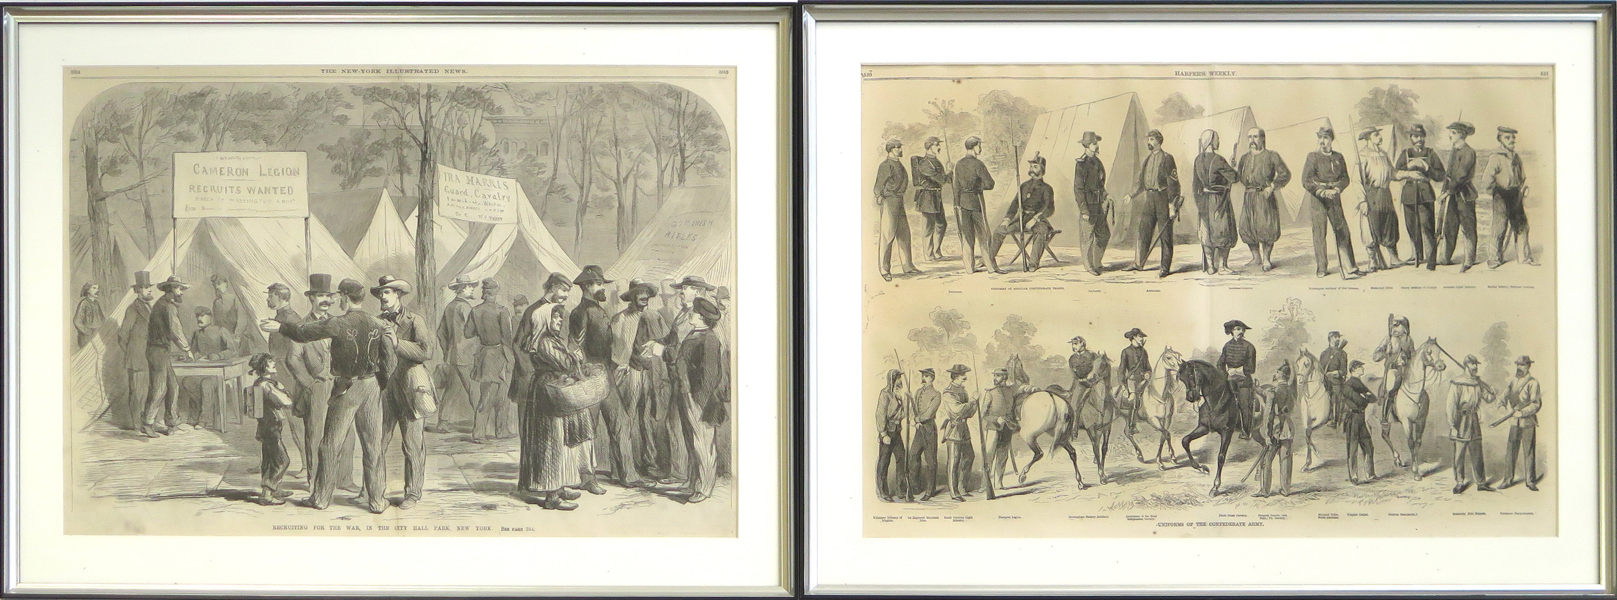 Litografier, 2 st: Amerikanska Inbördeskriget; "Uniforms of the Confederate Army" ur  "Harper's weekly" 17/8 1861 samt "Recruiting for the war, in the City Hall Park, New York" _31218a_lg.jpeg